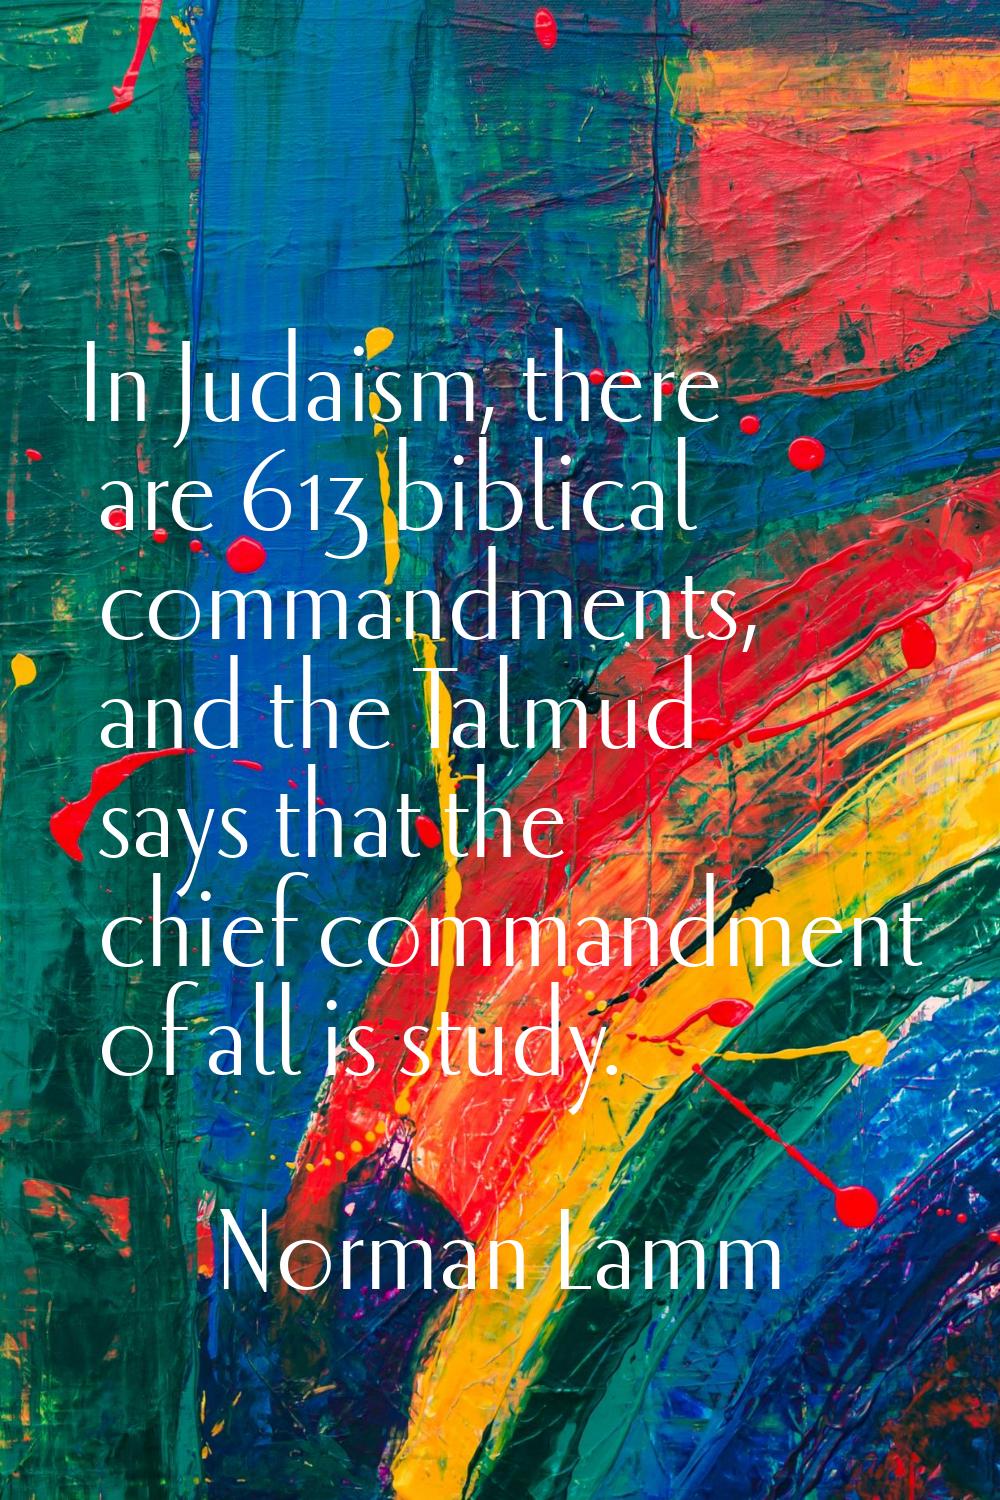 In Judaism, there are 613 biblical commandments, and the Talmud says that the chief commandment of 